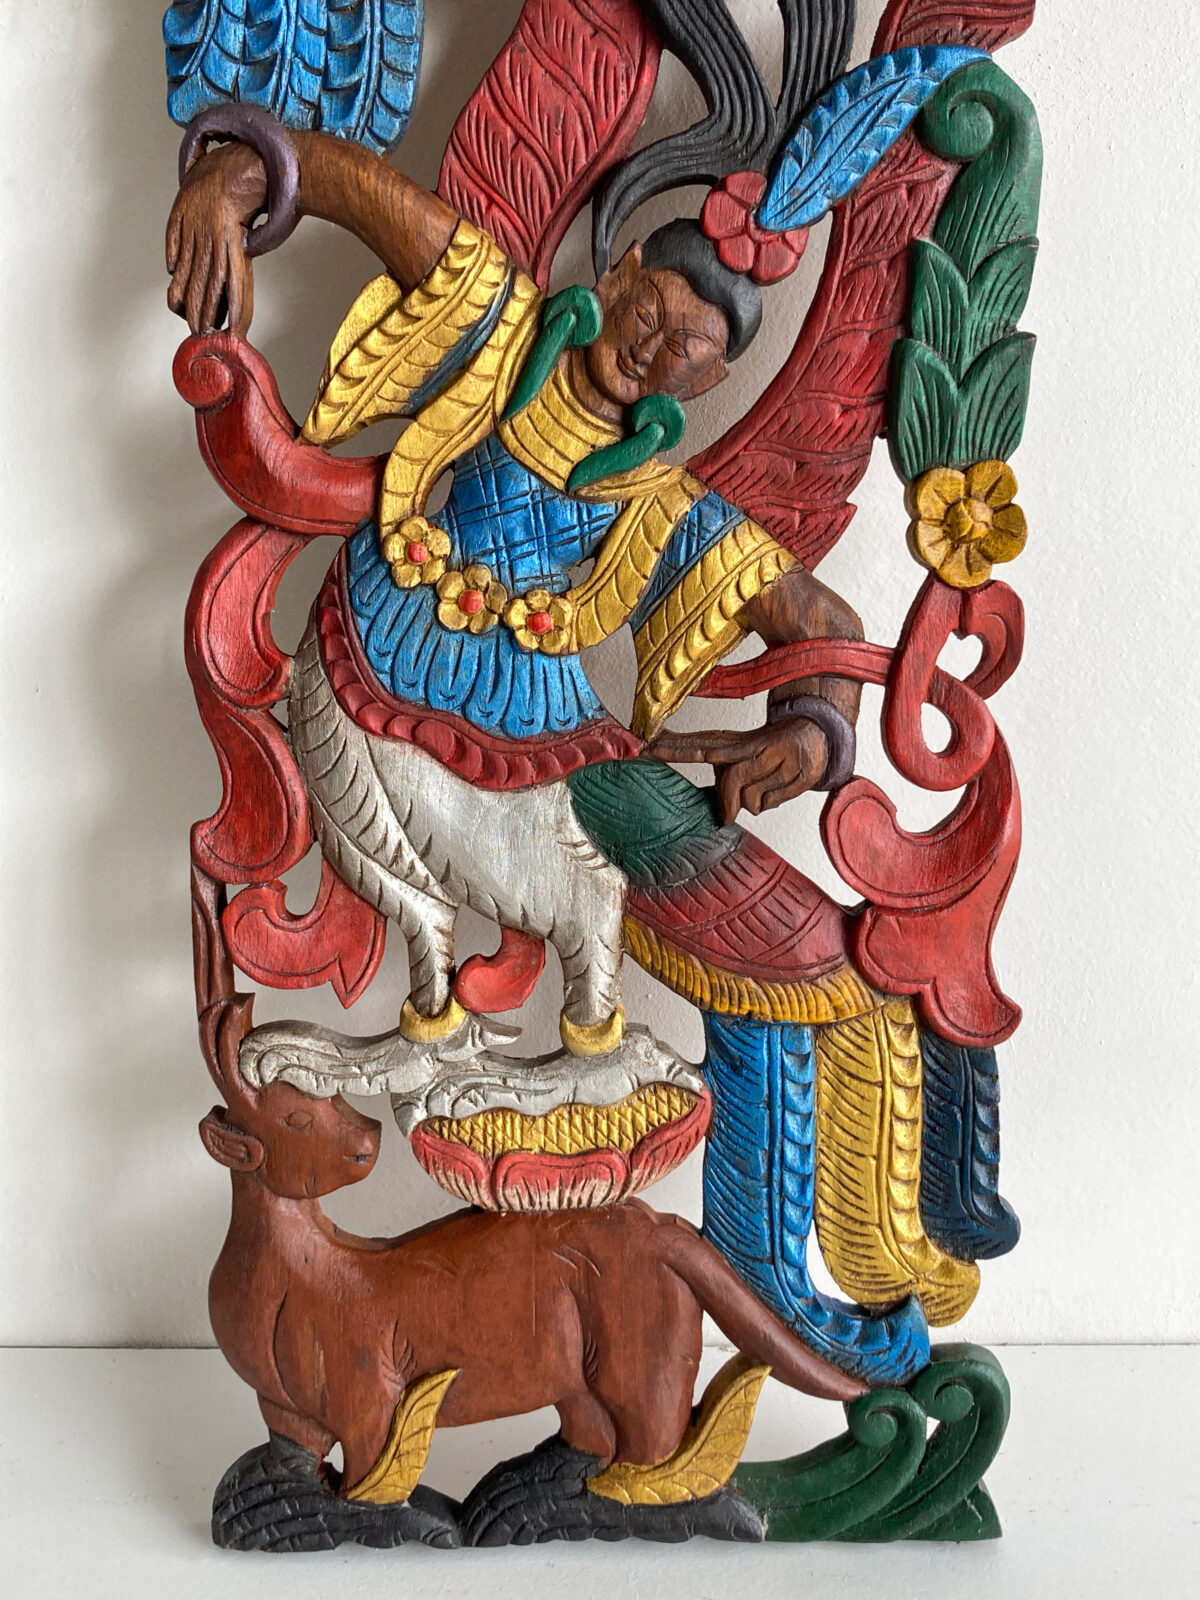 Bird dancing carving from Asia